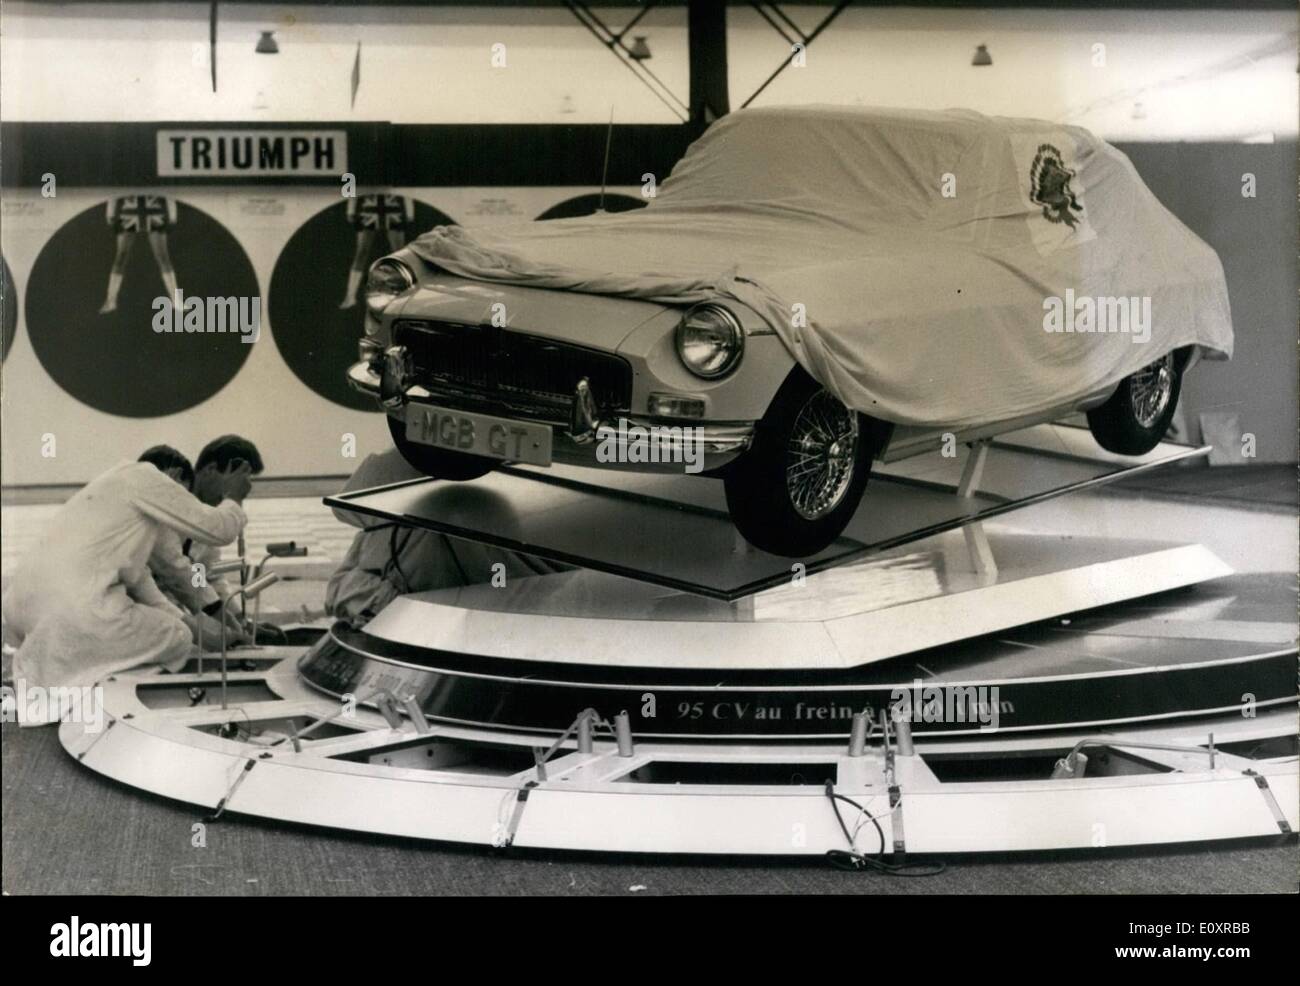 Oct. 10, 1967 - Motor Show 1967 to open October 6th Ã¢â‚¬â€œ The Annual Motor Show will open in Paris, October 6th. OPS: One of Stock Photo